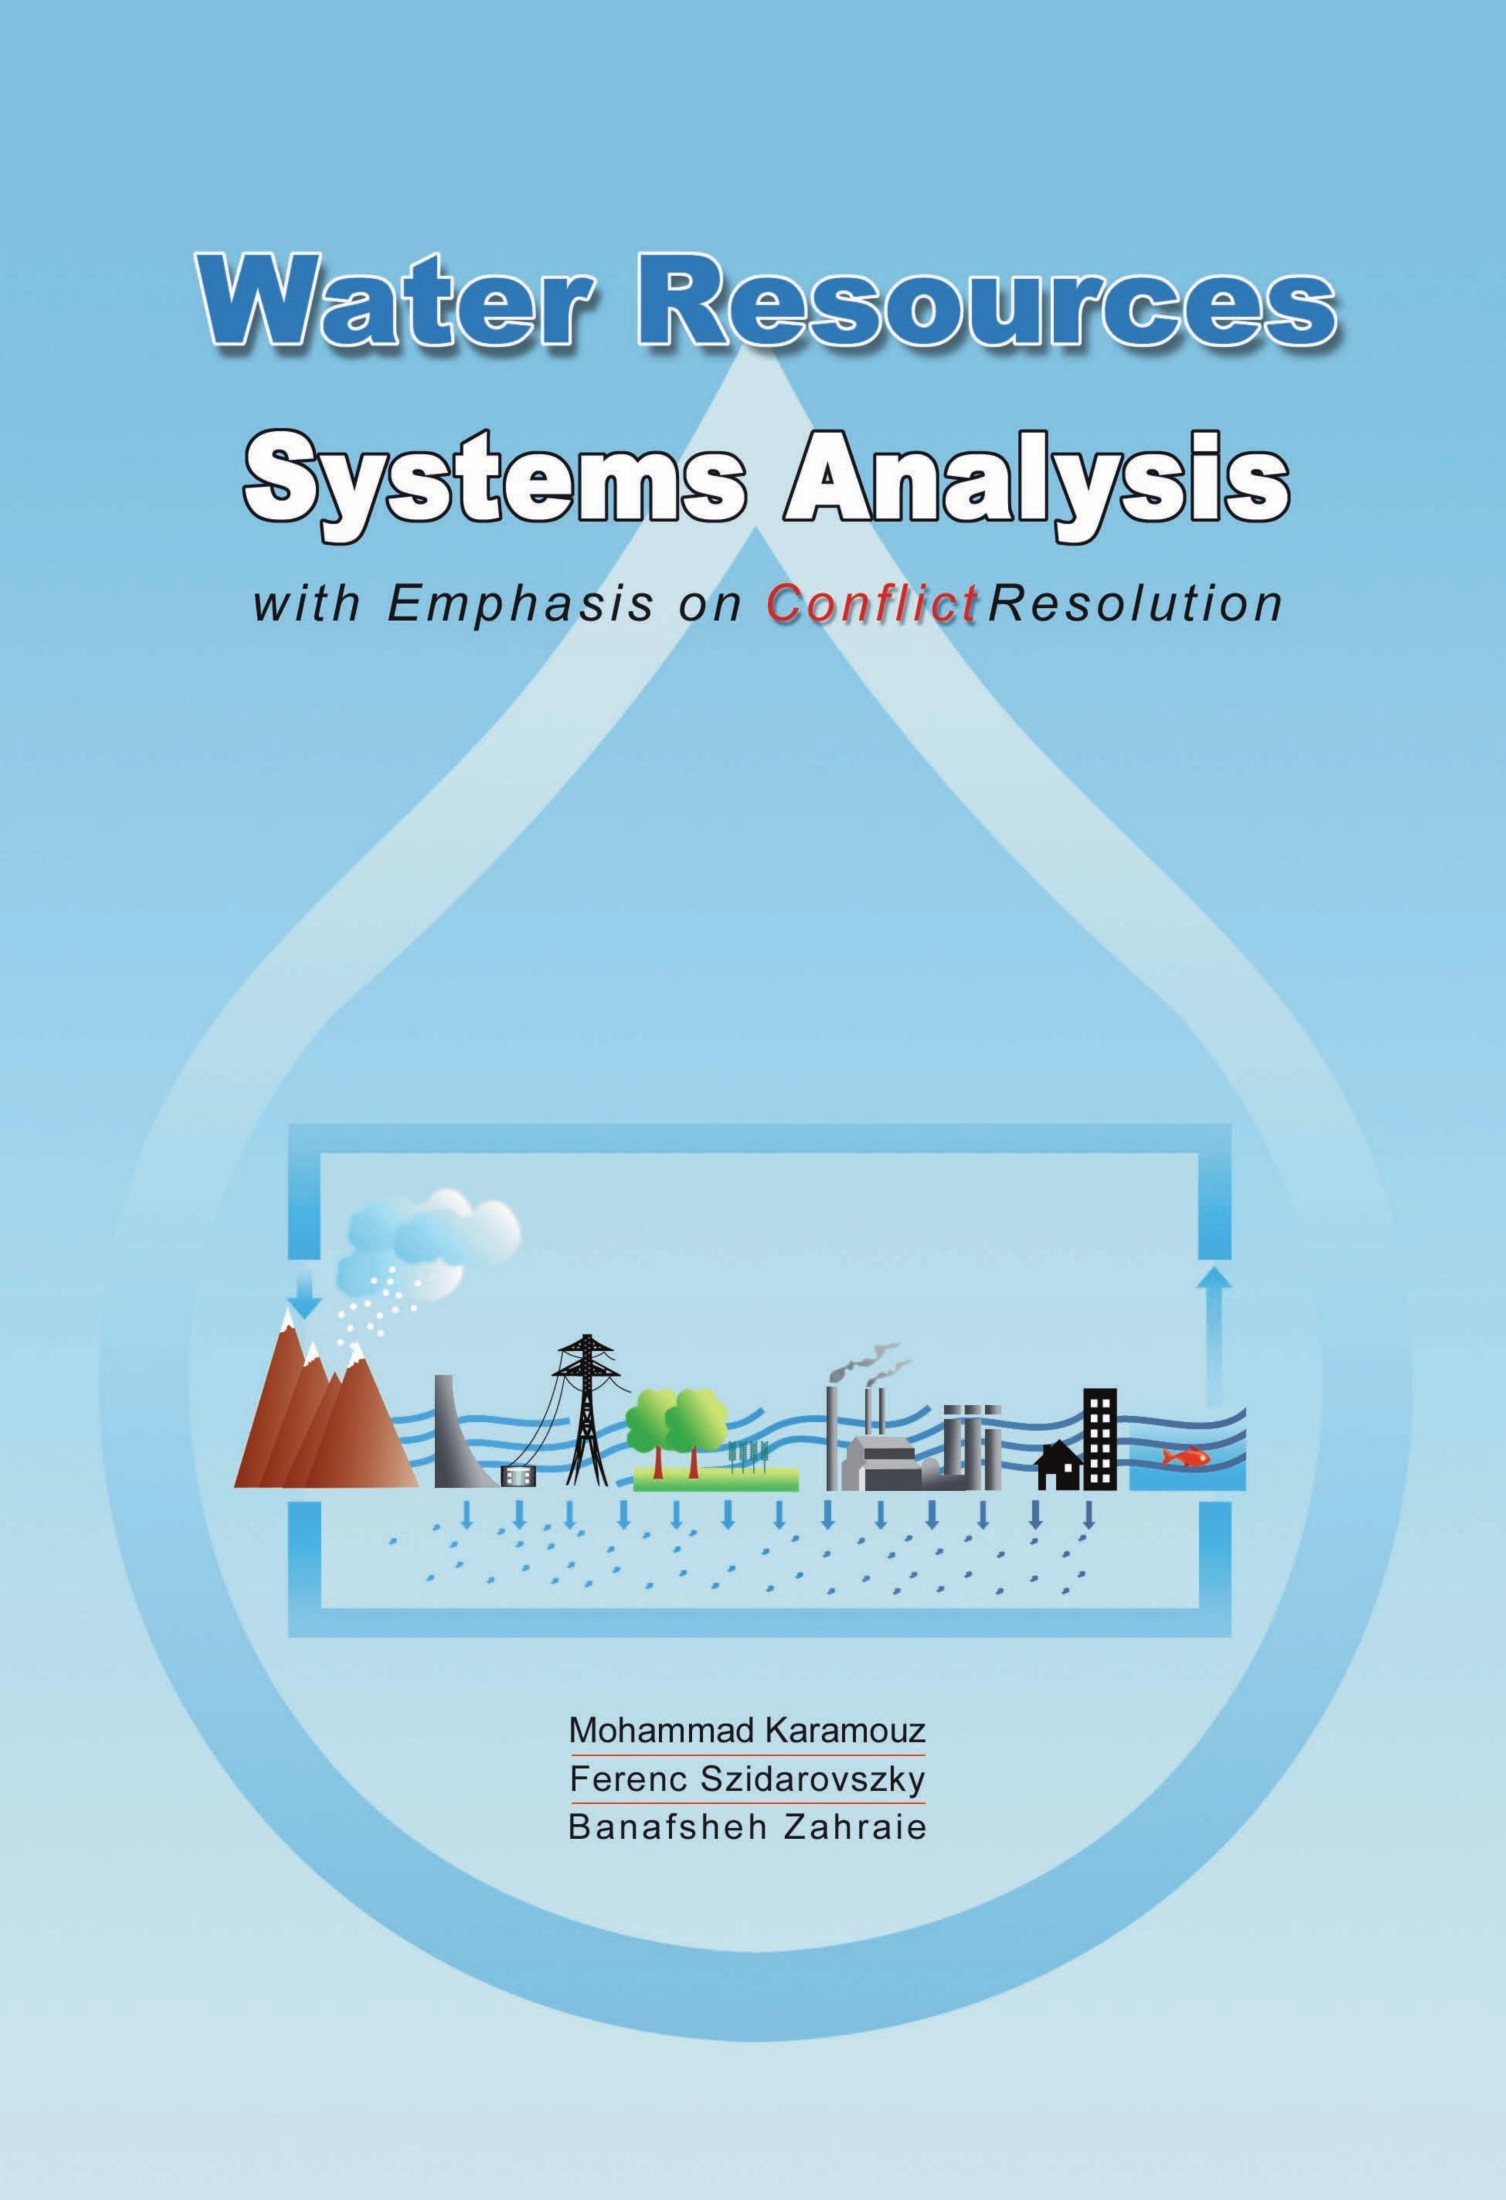 Water resources systems analysis